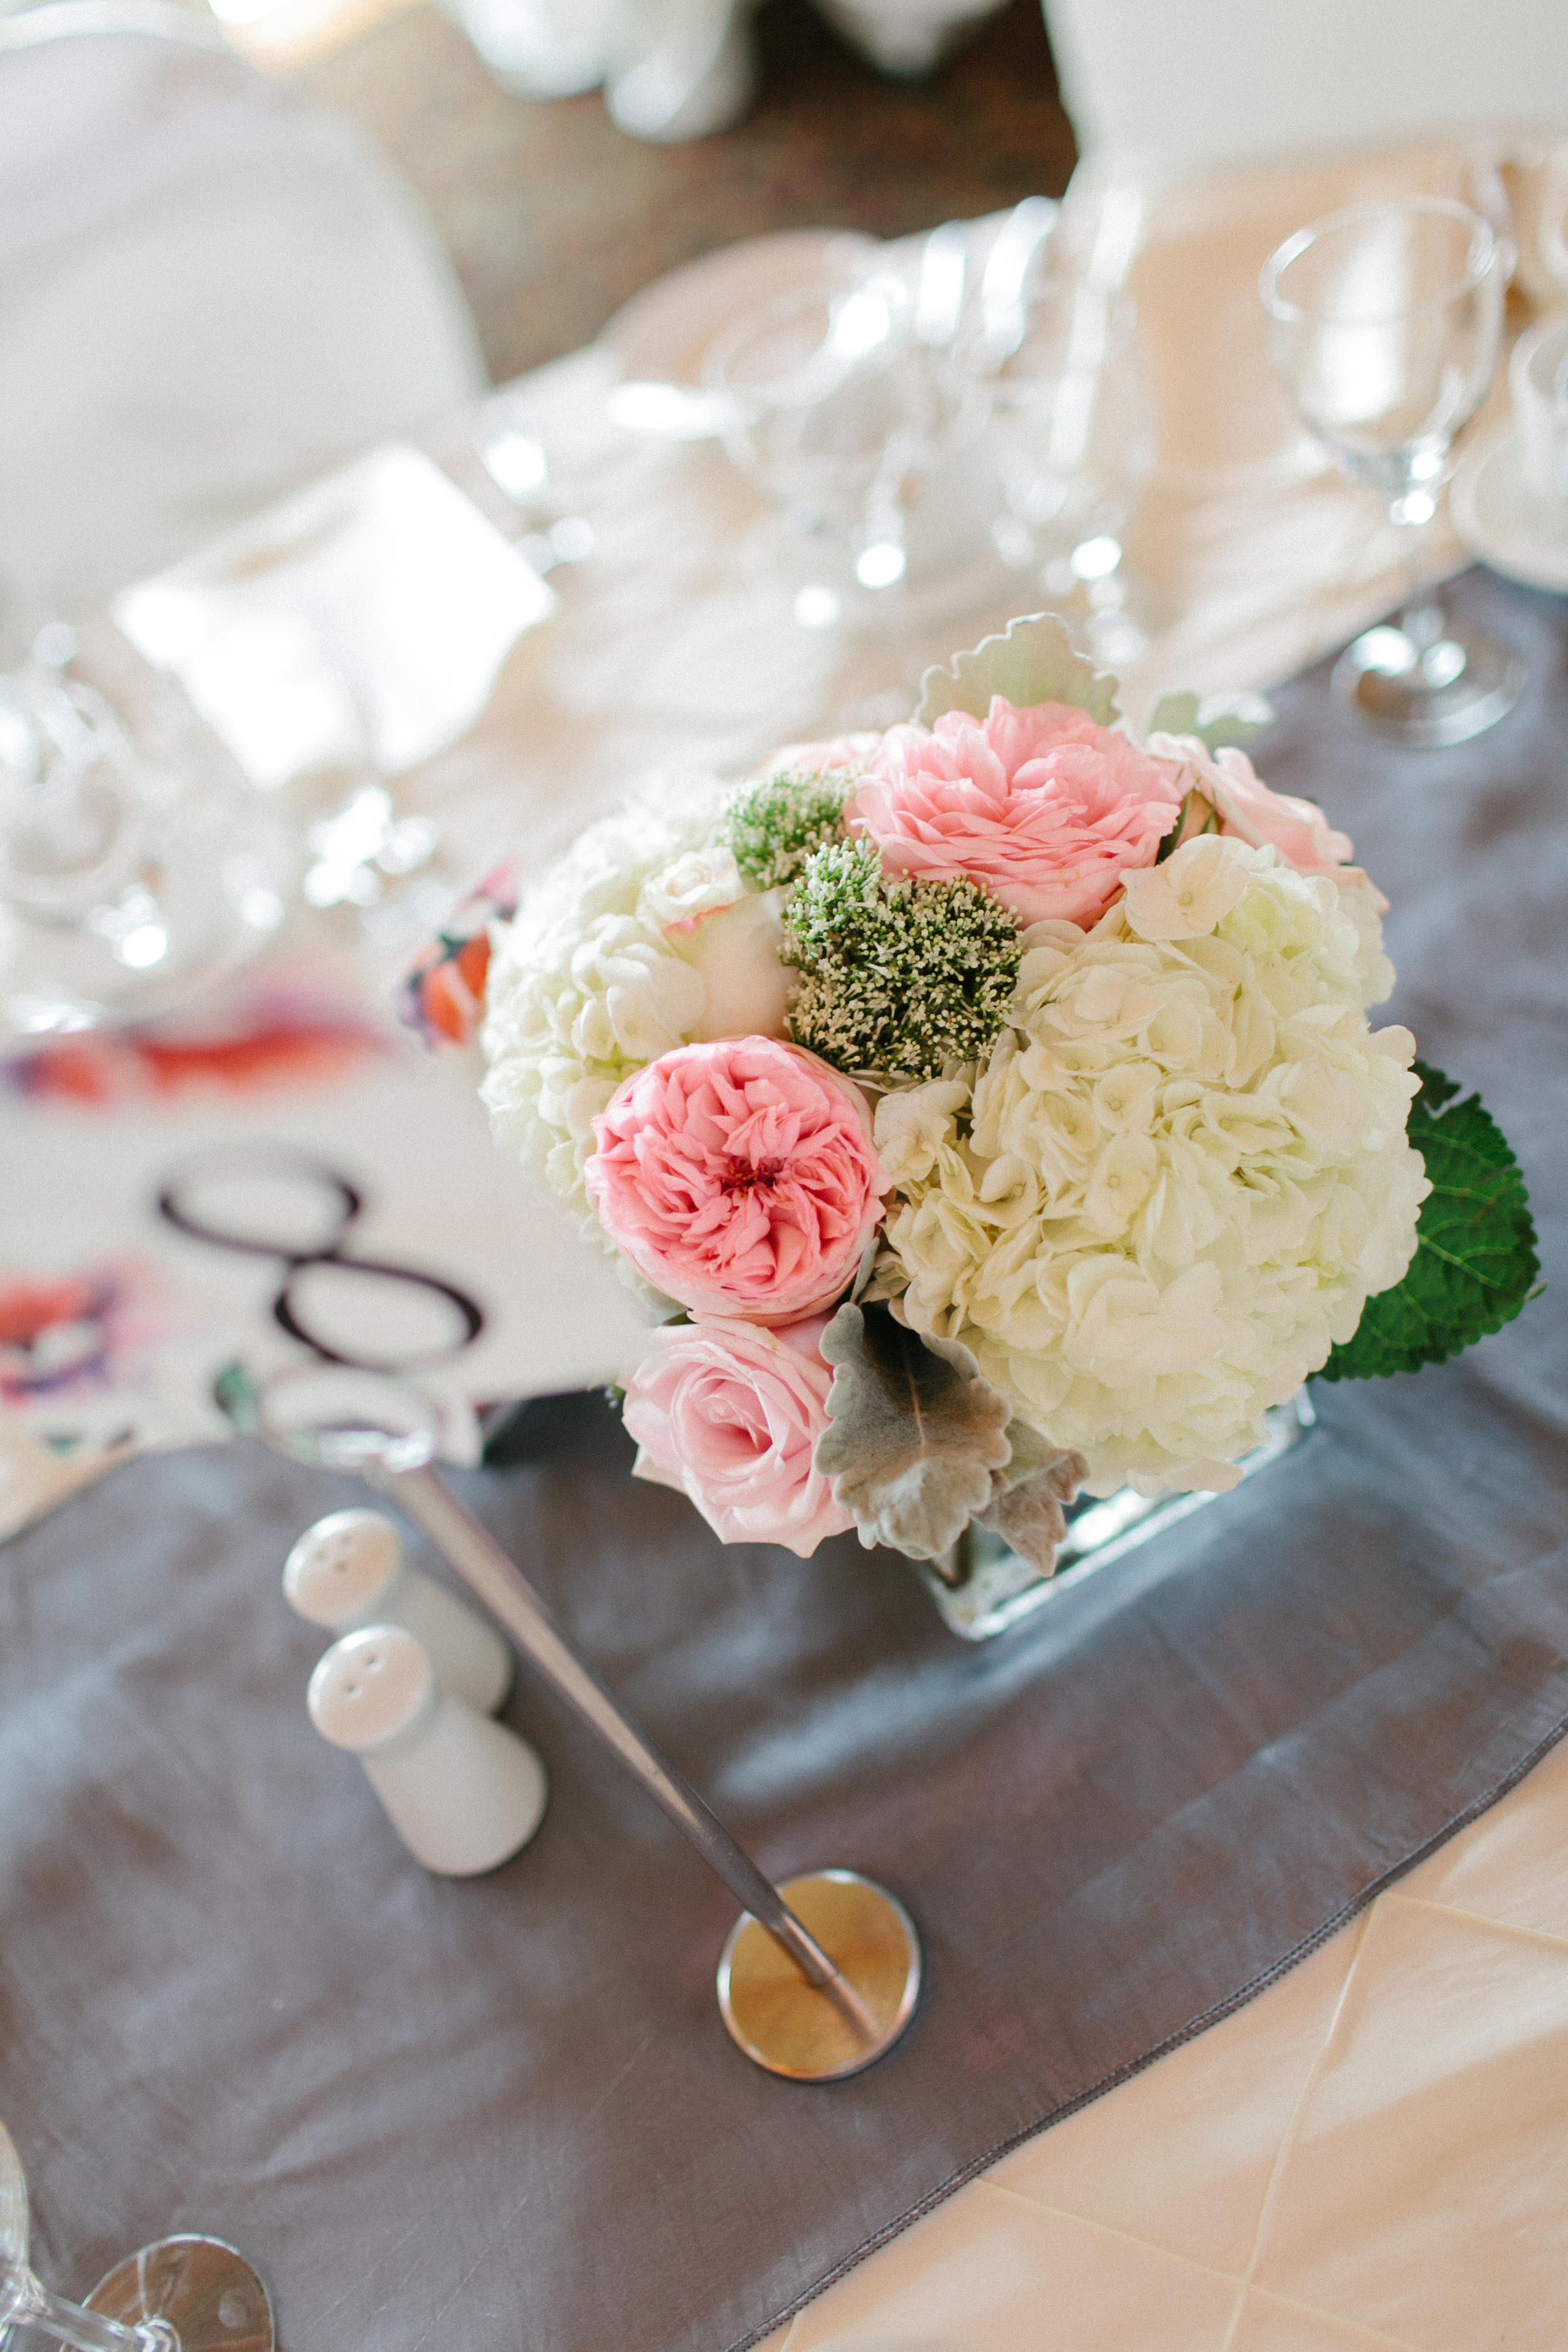  Pretty Pink and White Hydrangea Centerpiece | photo by blf Studios | flowers by Norwood Florist | wedding by Madeline's Weddings 